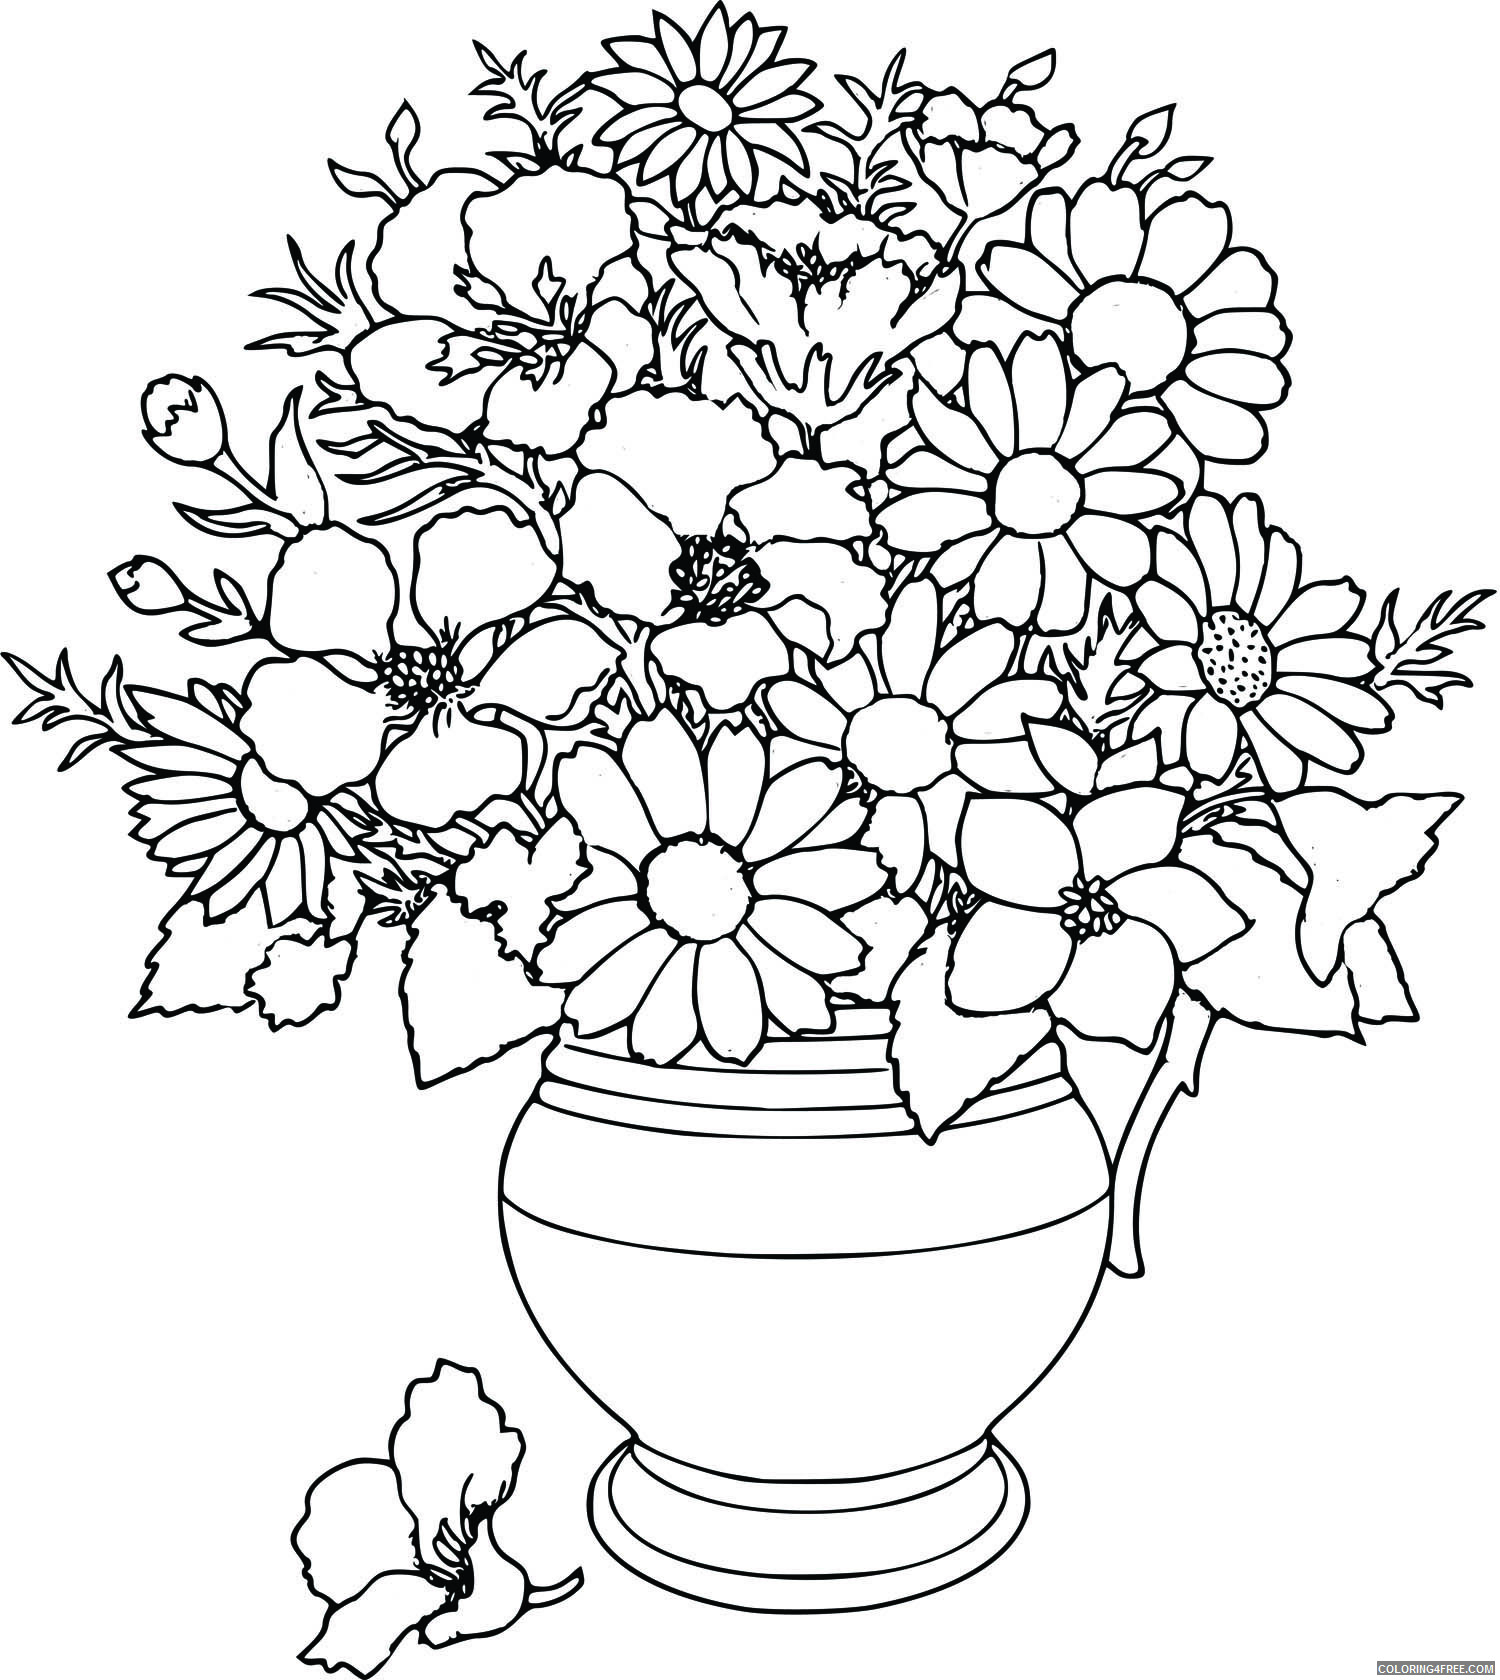 Adult Floral Coloring Pages Flower for Adults 2 Printable 2020 356 Coloring4free